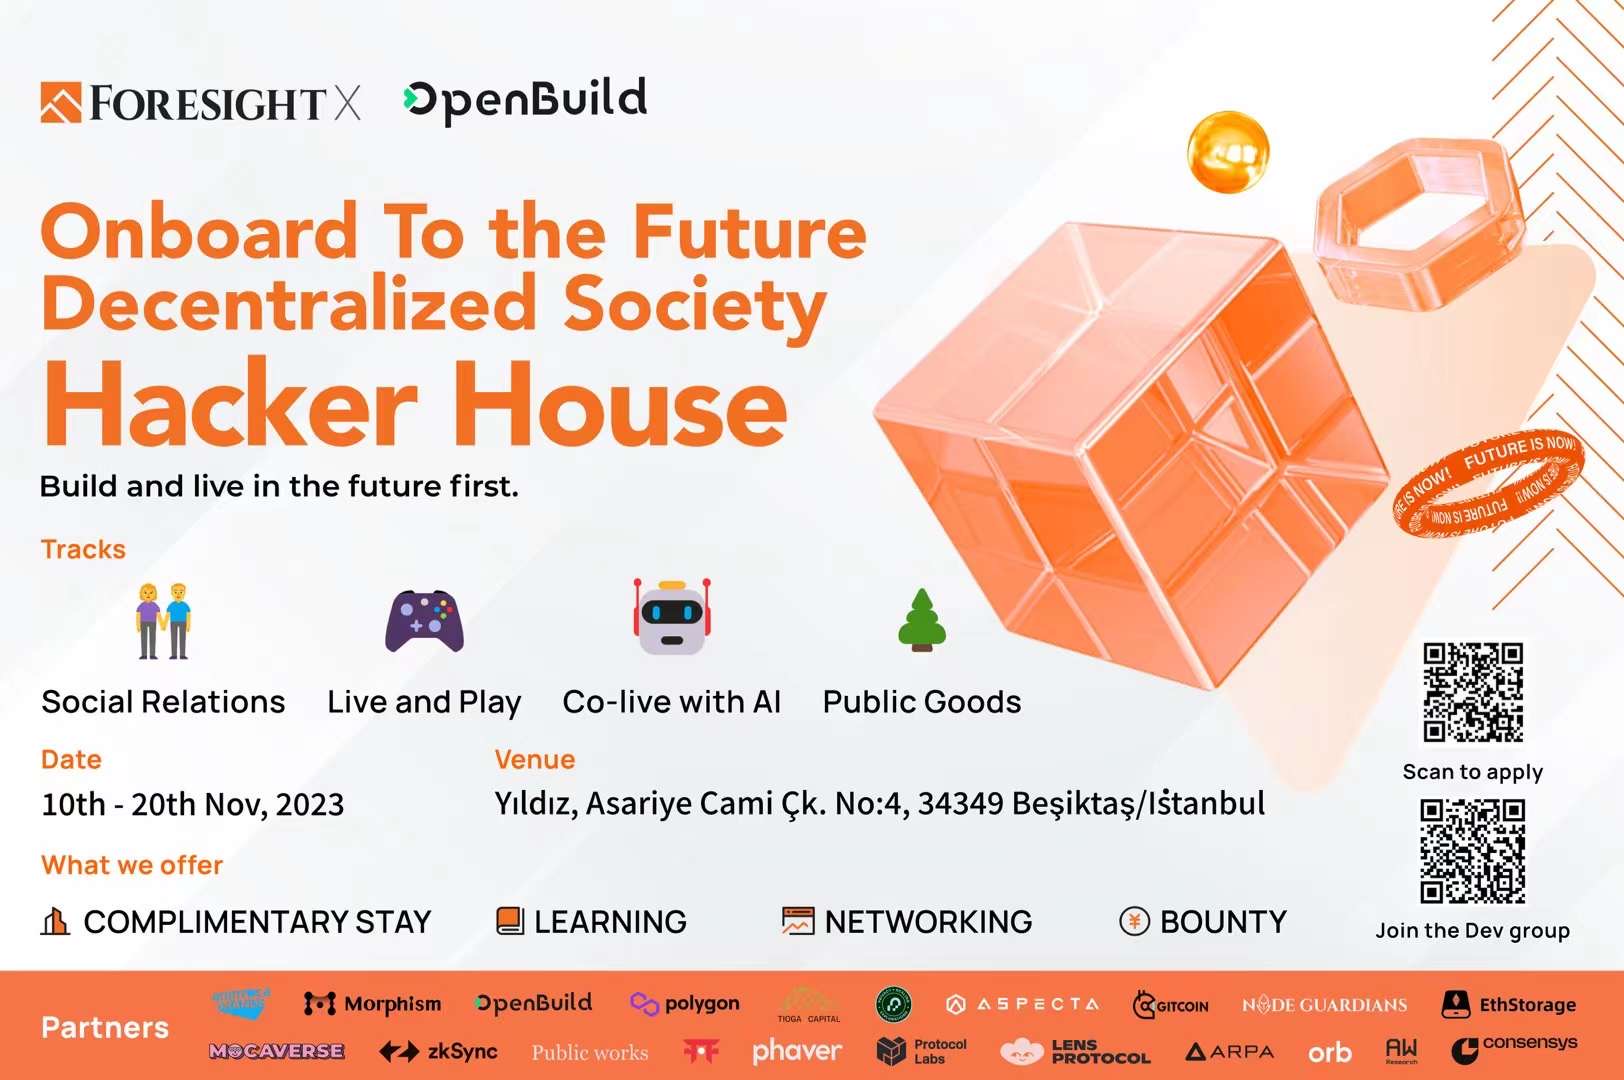 Onboard to the Future Decentralized Society Hacker House